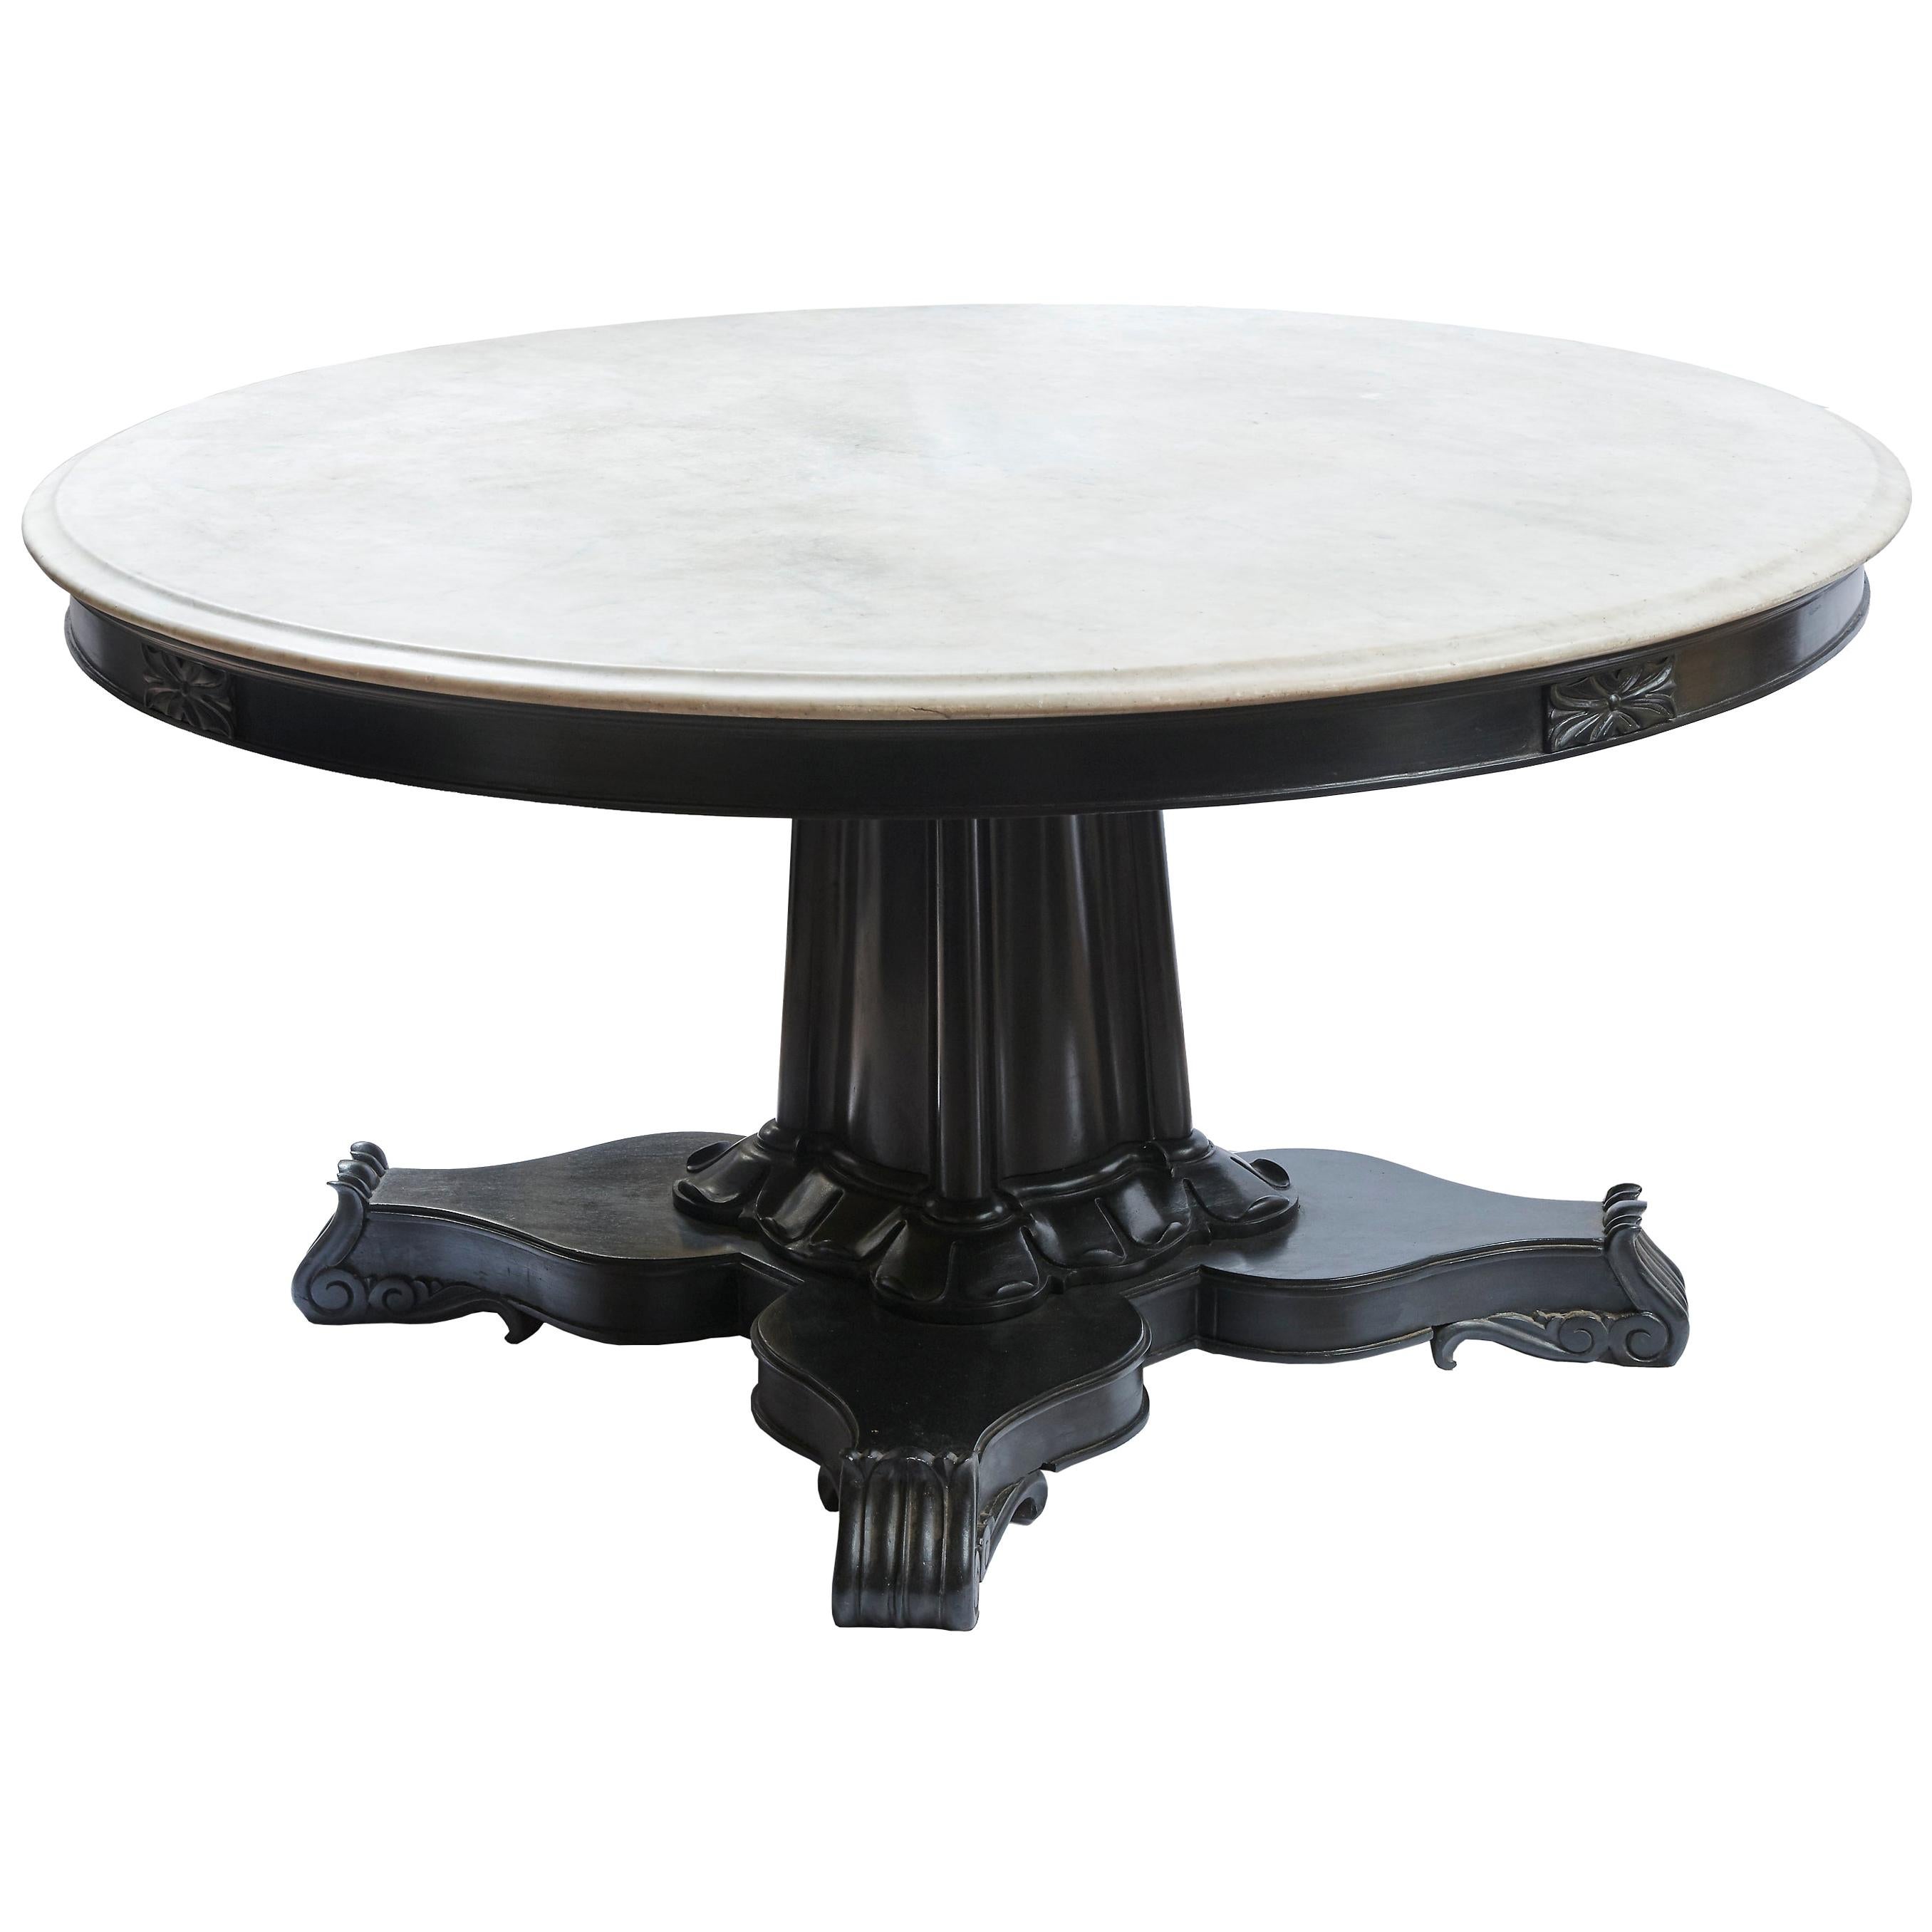 Large Anglo-Indian Ebonized Centre Table, Early 20th Century For Sale